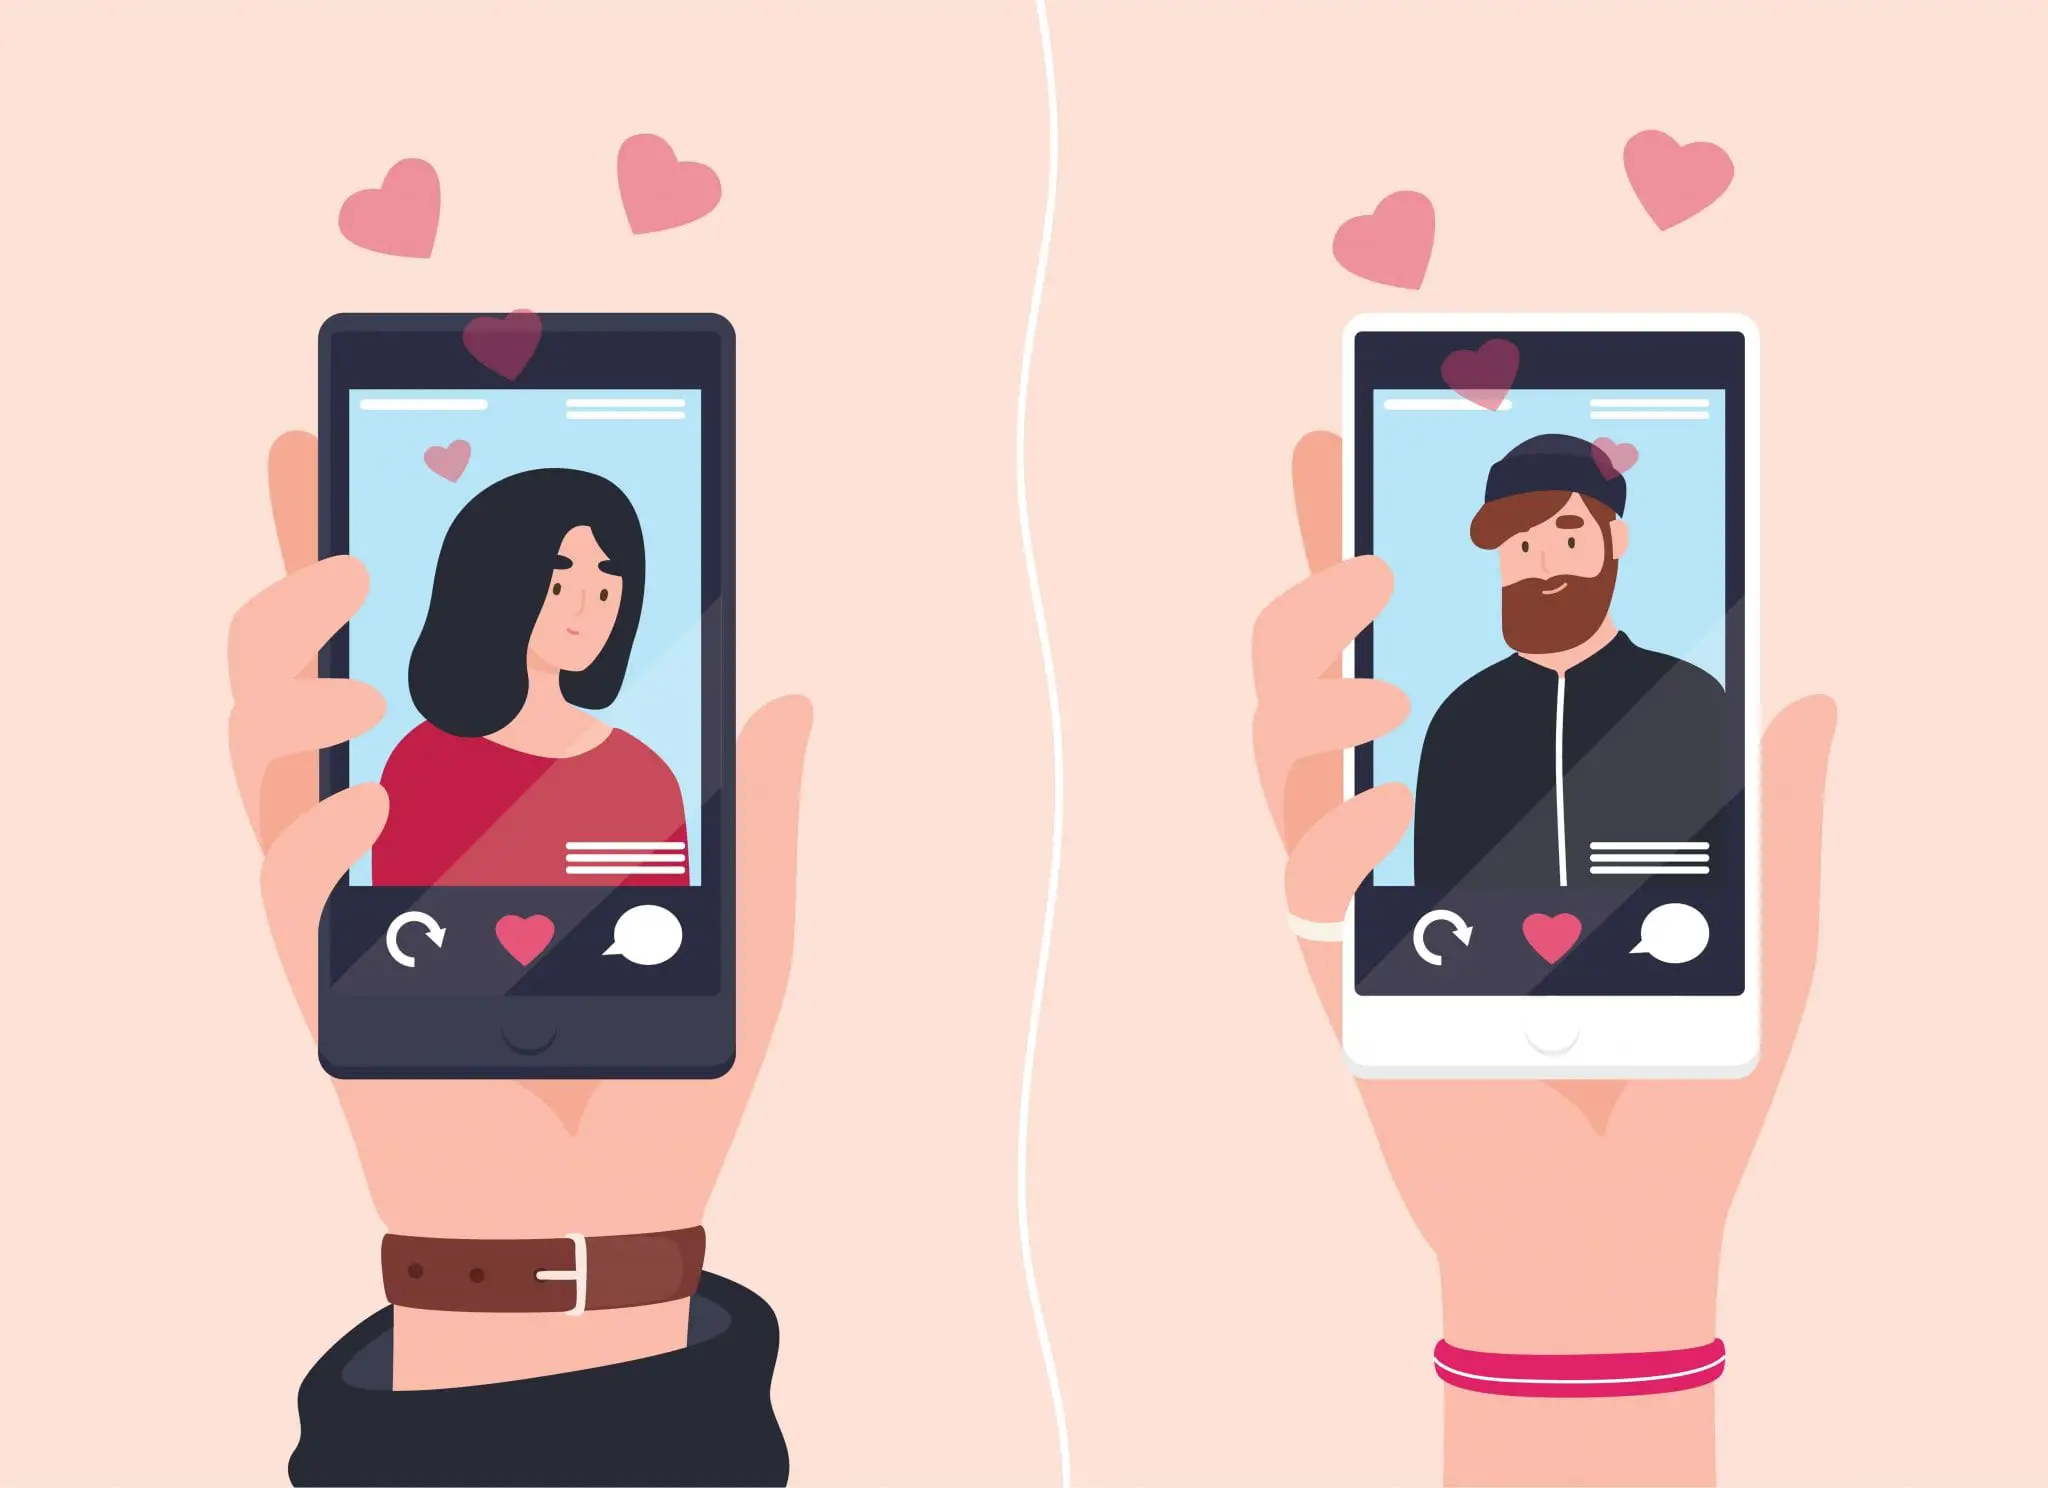 Male and Female Hands Holding Smartphones With Portraits of Man and Woman on Screens. Social Mobile Application for Dating, Searching for Romantic Partner.